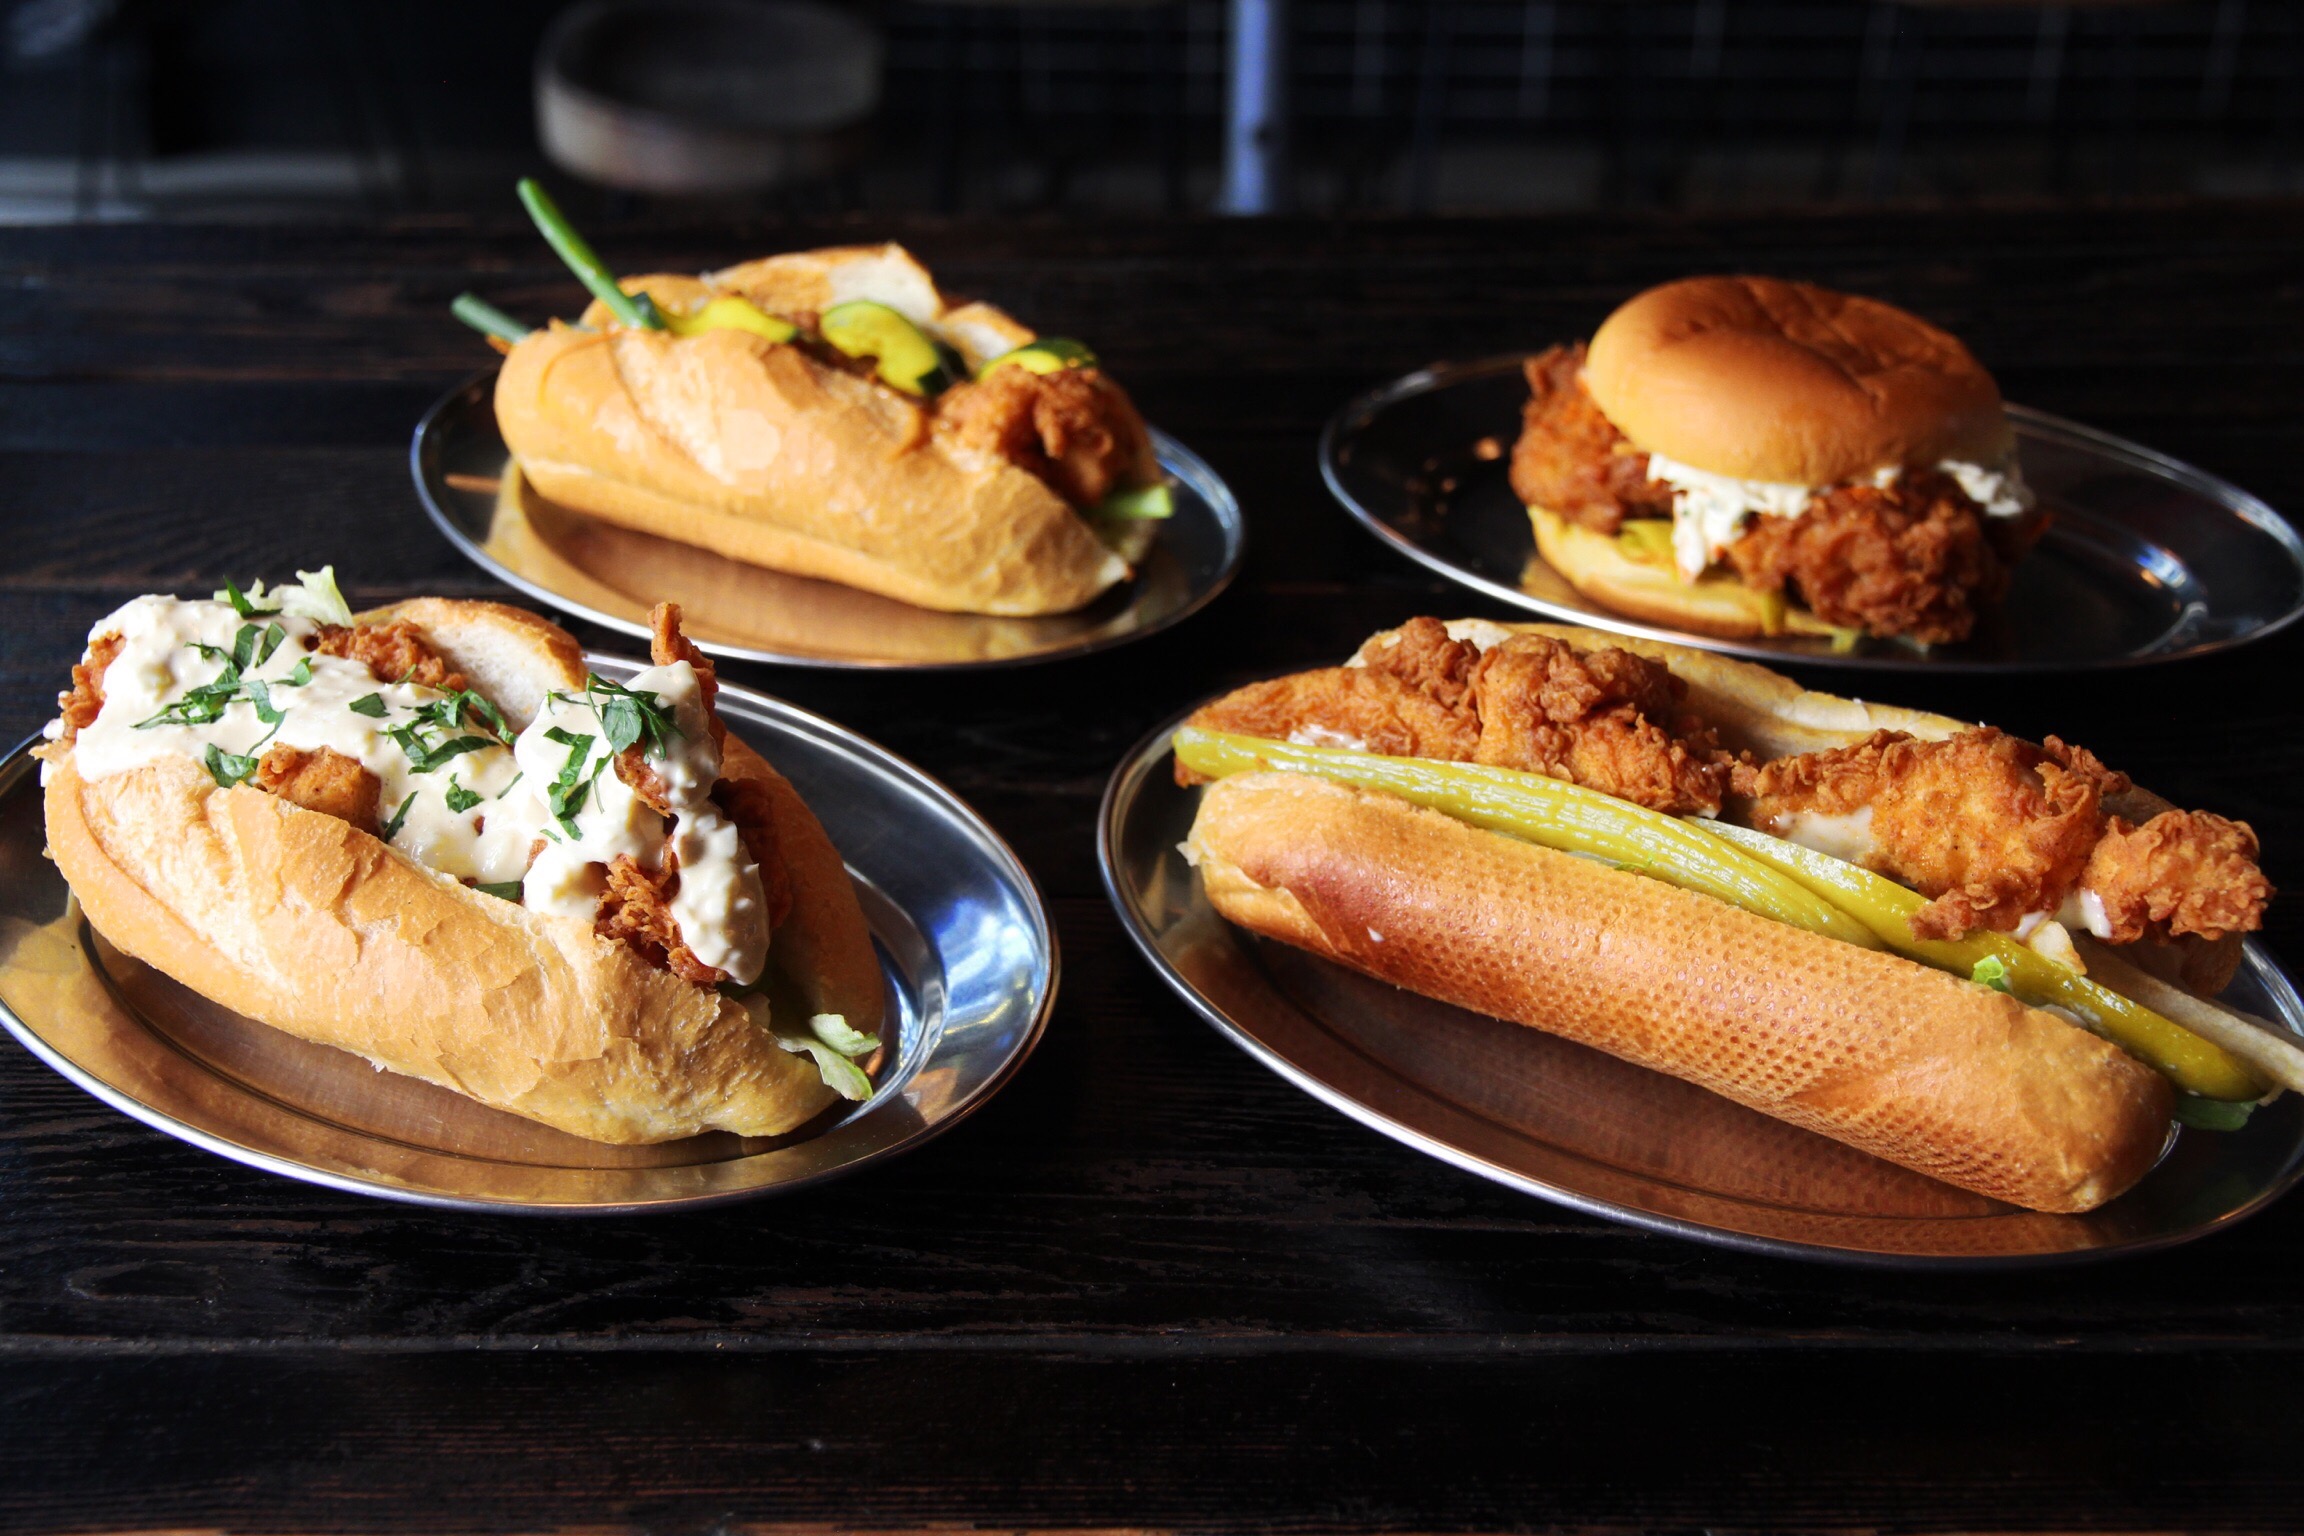 Now at Butter: Eight Special Fried Chicken Sandwiches From Some of Sydney’s Best Chefs